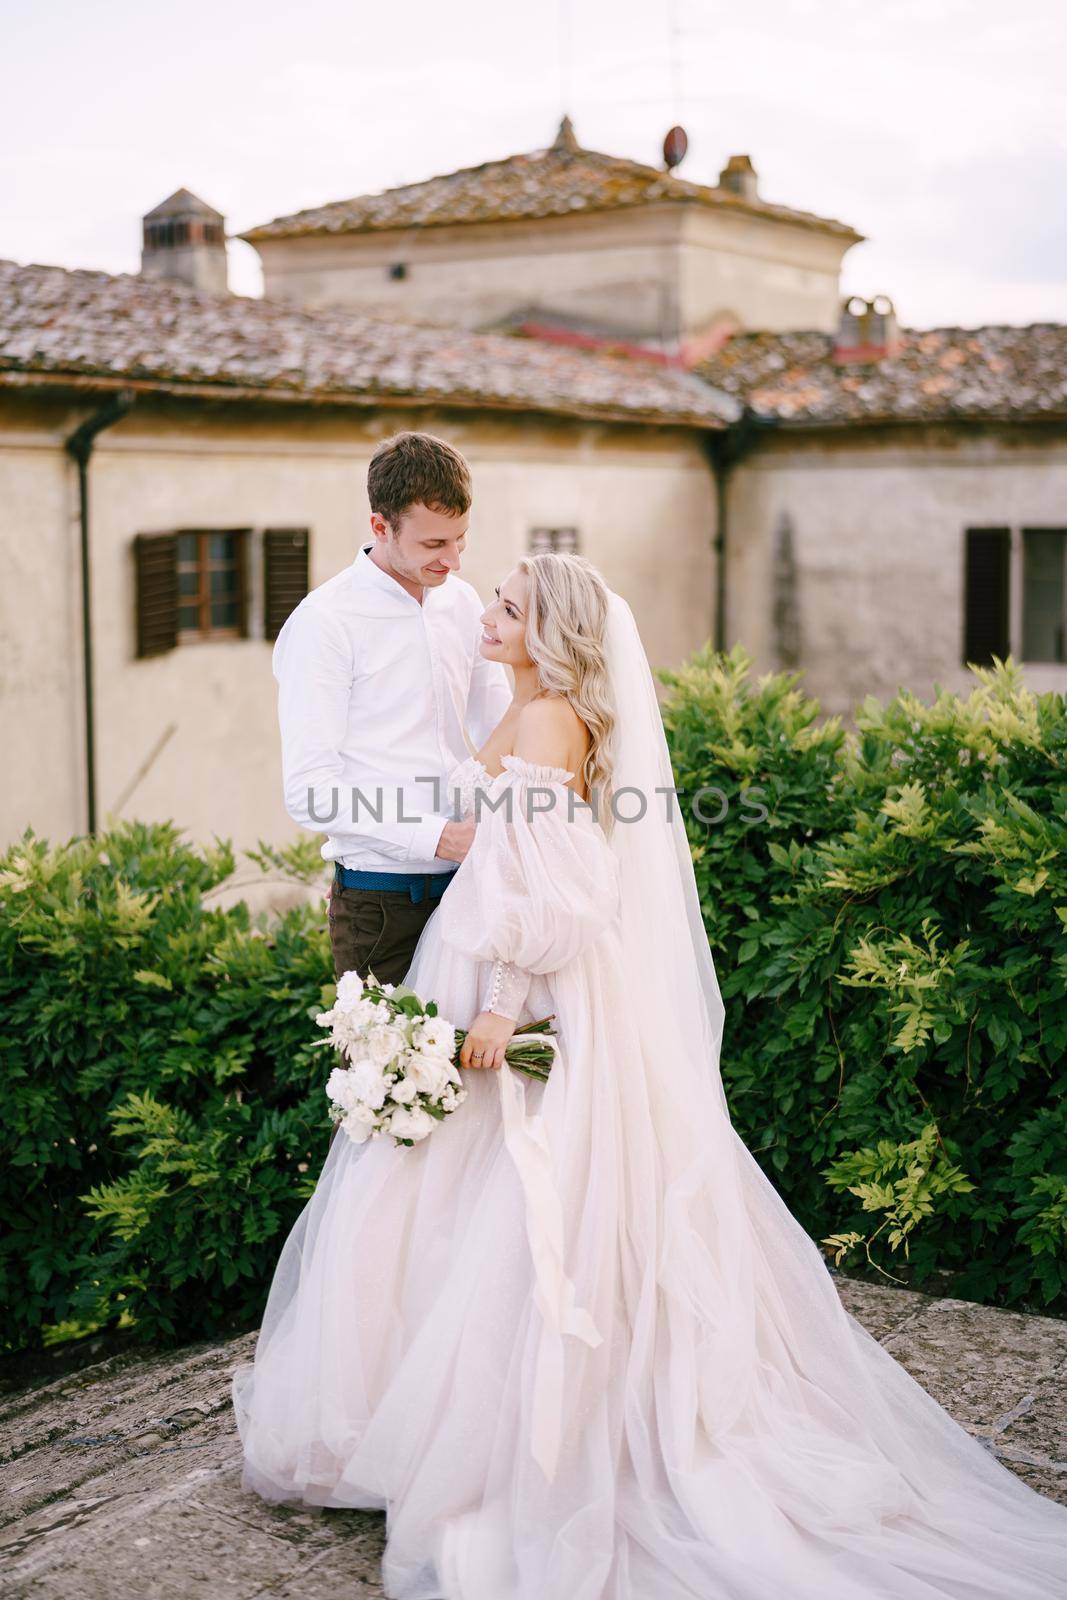 Wedding at an old winery villa in Tuscany, Italy. Wedding couple on the roof of an old winery villa. by Nadtochiy